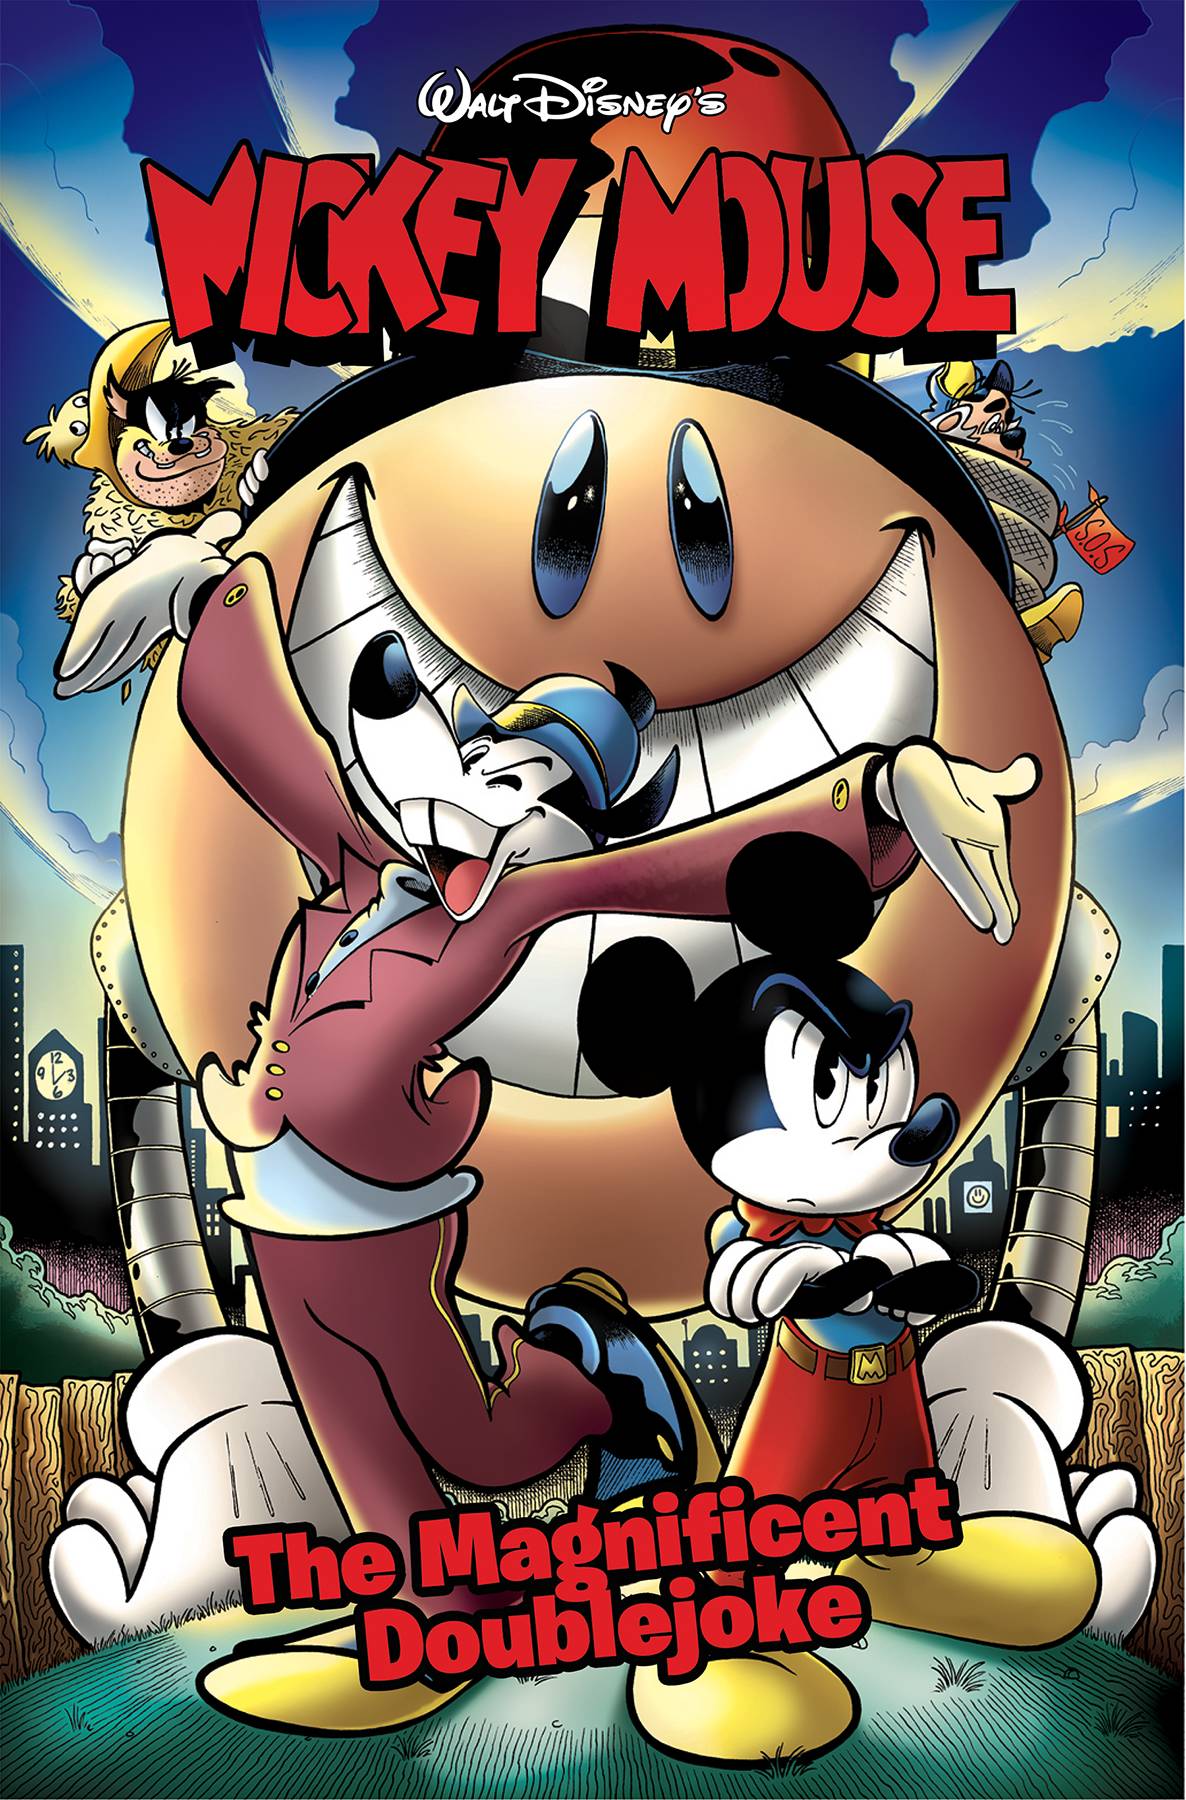 MICKEY MOUSE TP VOL 07 MAGNIFICENT DOUBLEJOKE